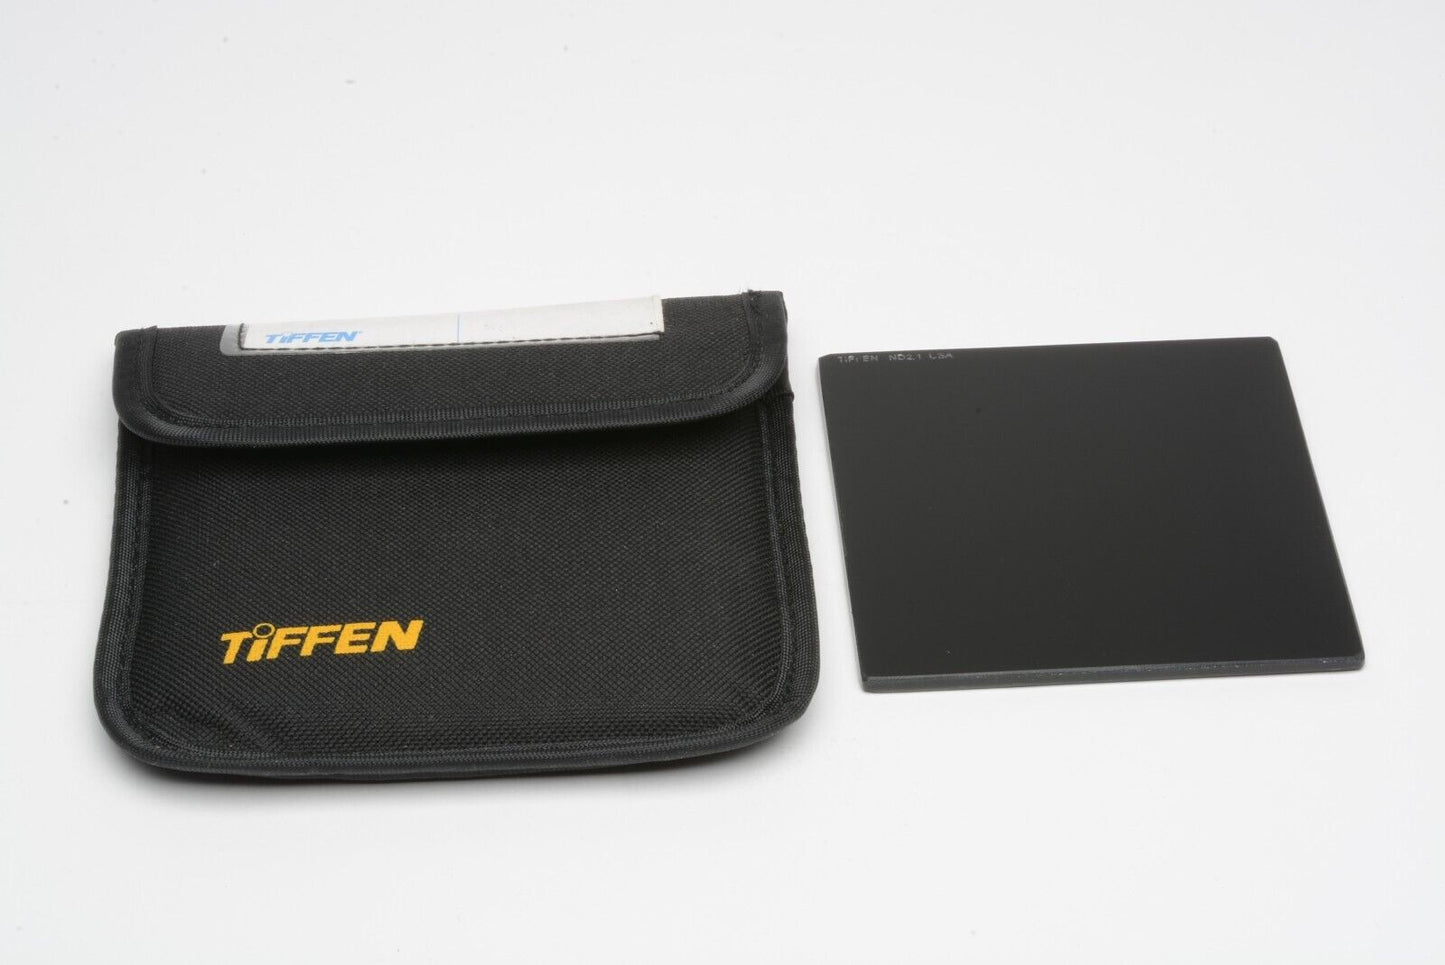 EXC+++ TIFFEN 100mm SQUARE NEUTRAL DENSITY ND2.1 7 STOP, VERY CLEAN, IN POUCH